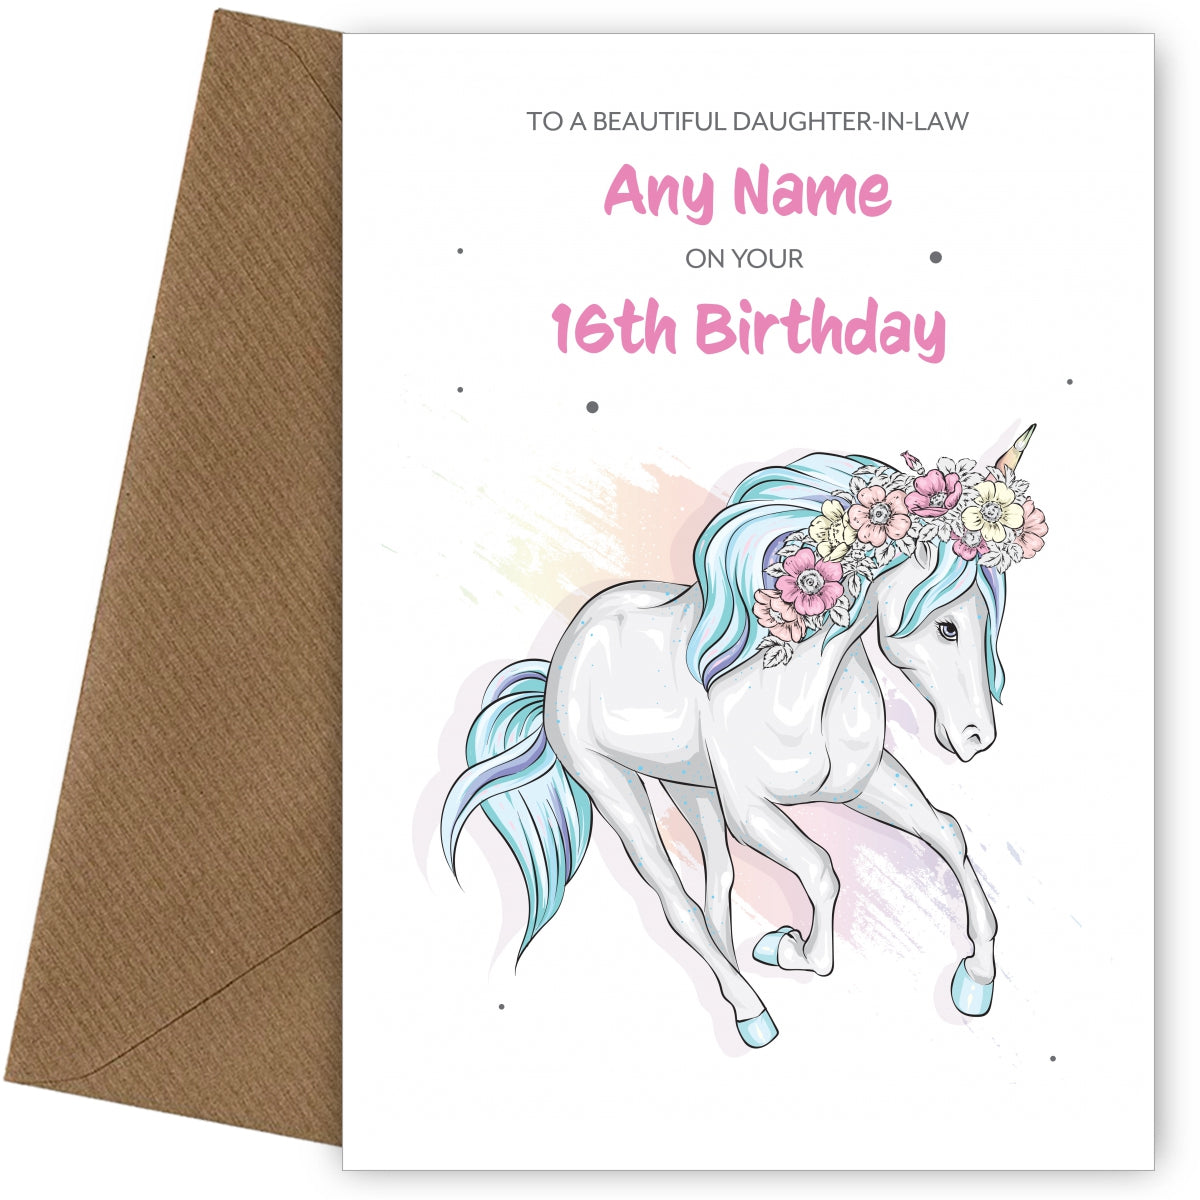 16th Birthday Card for Daughter-in-law - Beautiful Unicorn